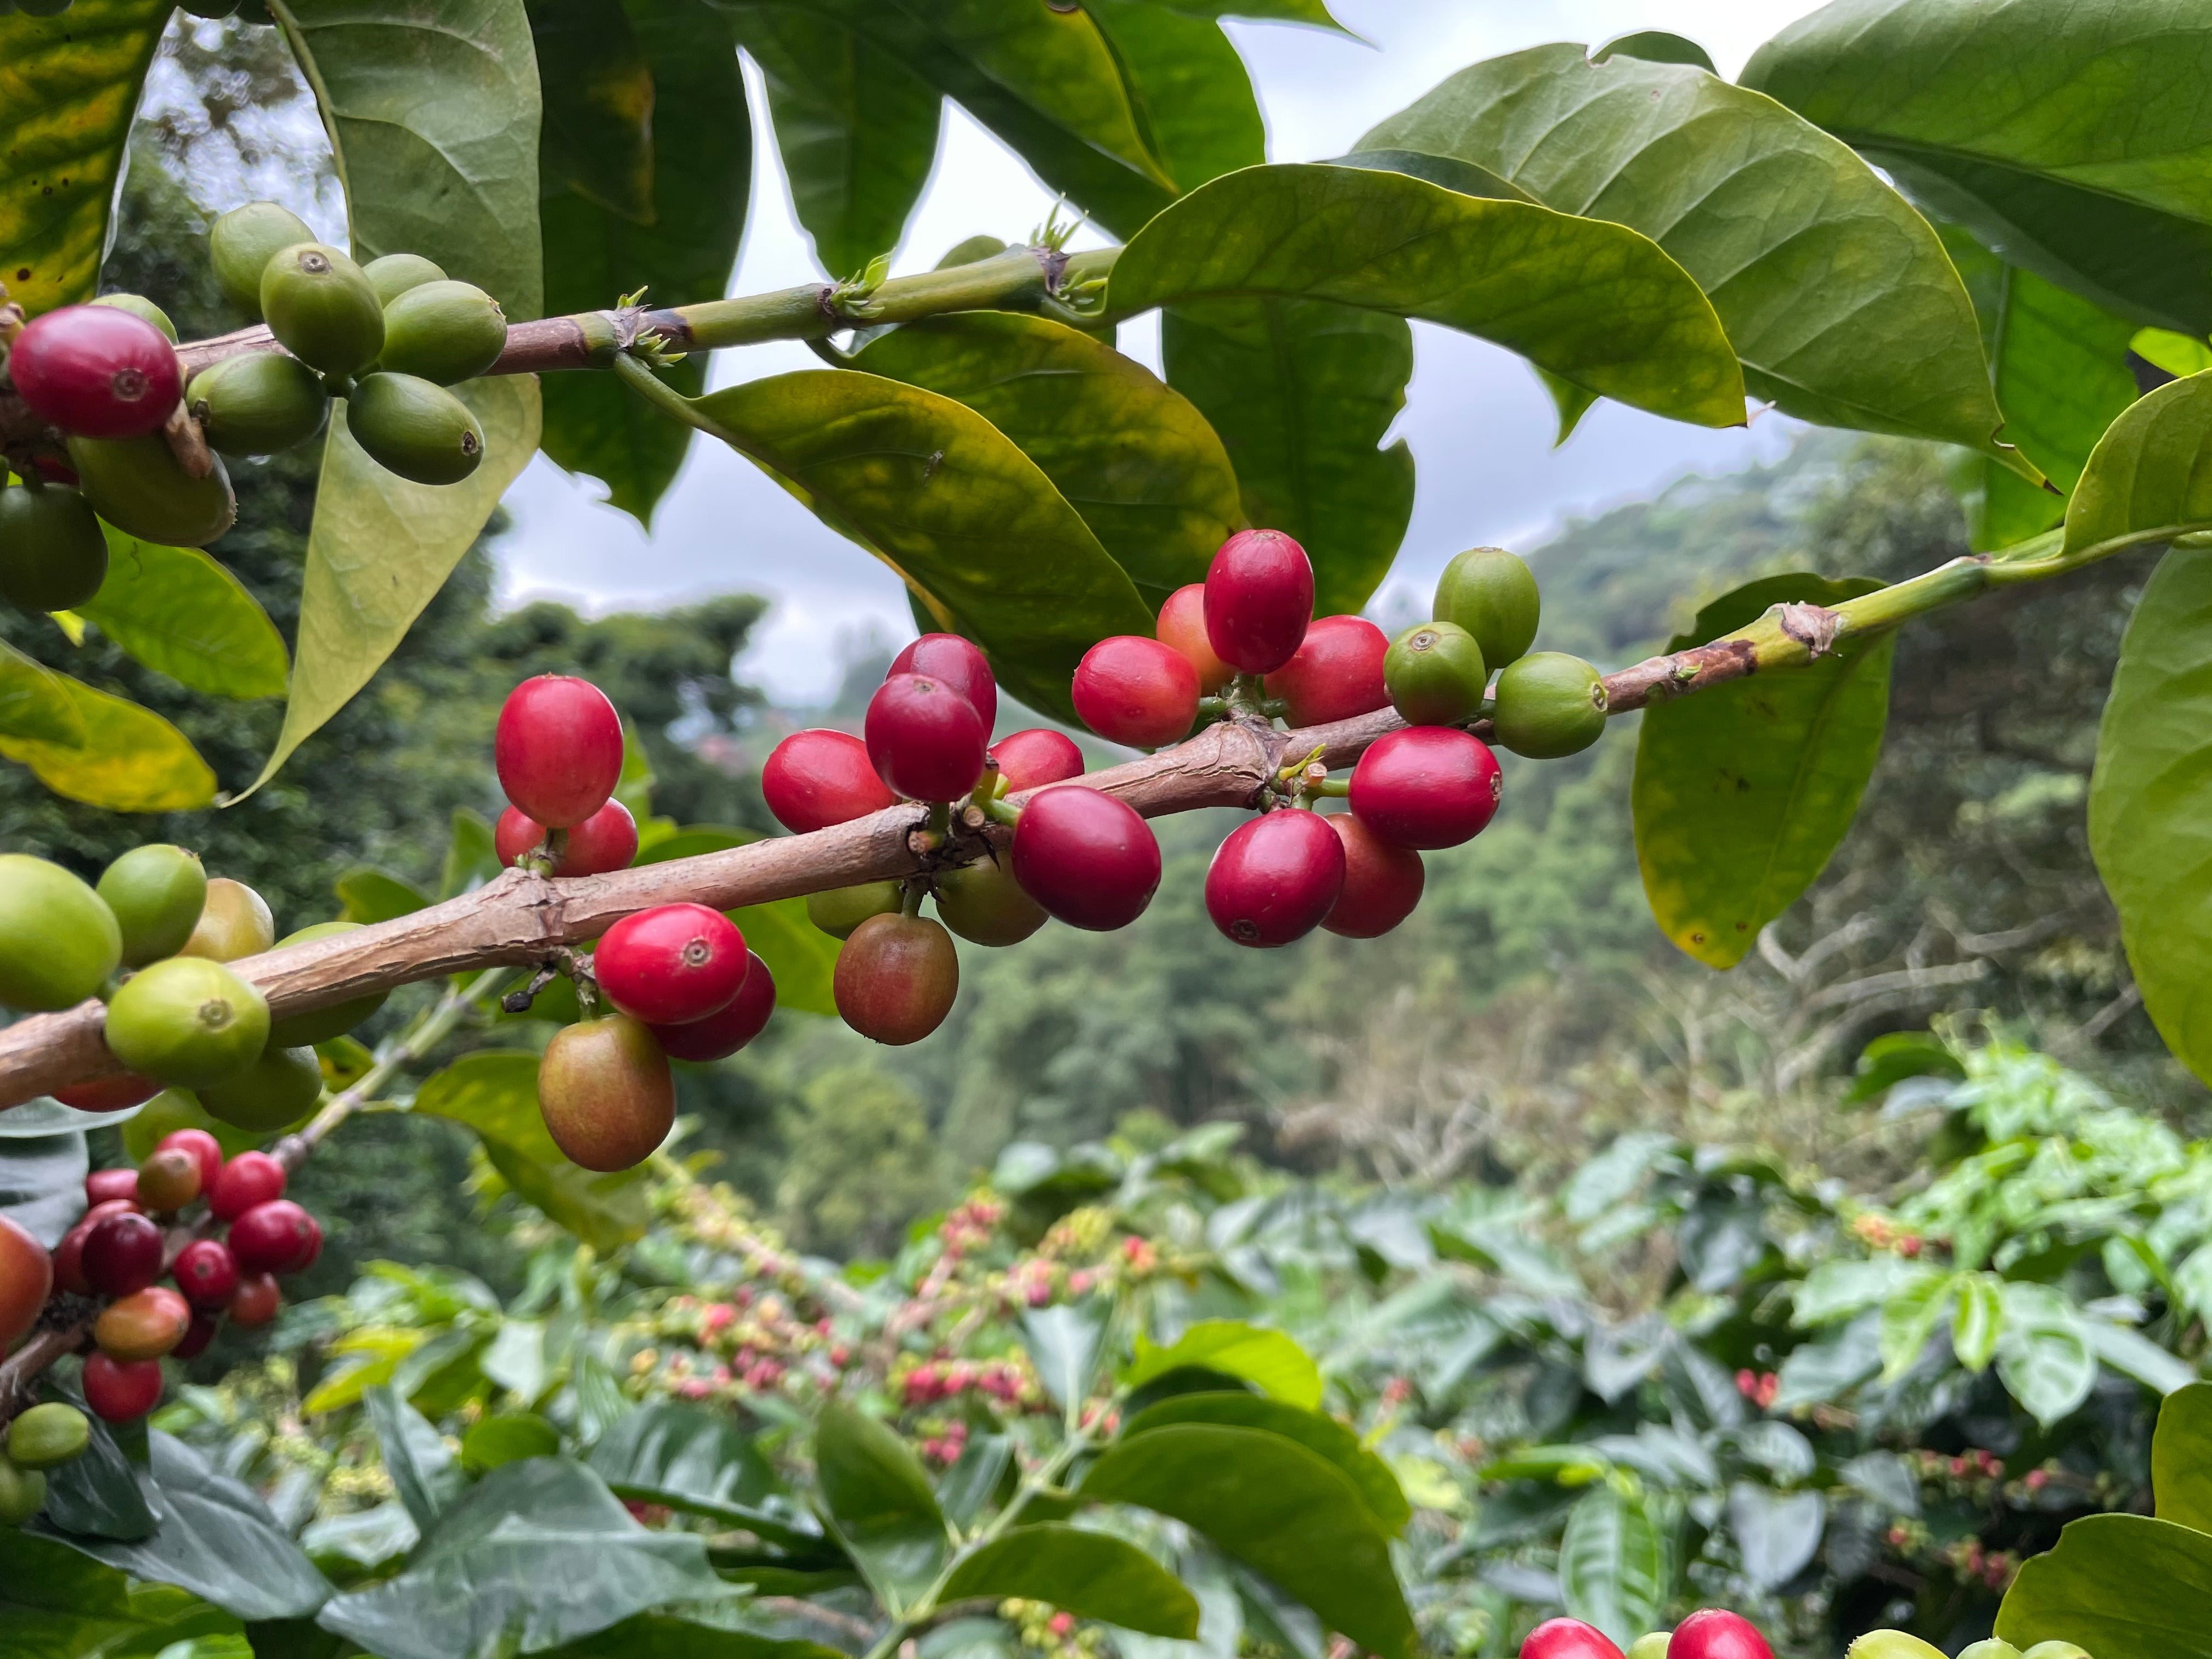 Coffee brench with some ripe coffee cherries on a farm visit of the beautiful coffee farm of Café Vélez 1810. High in the mountains close to Cali, Colombia.